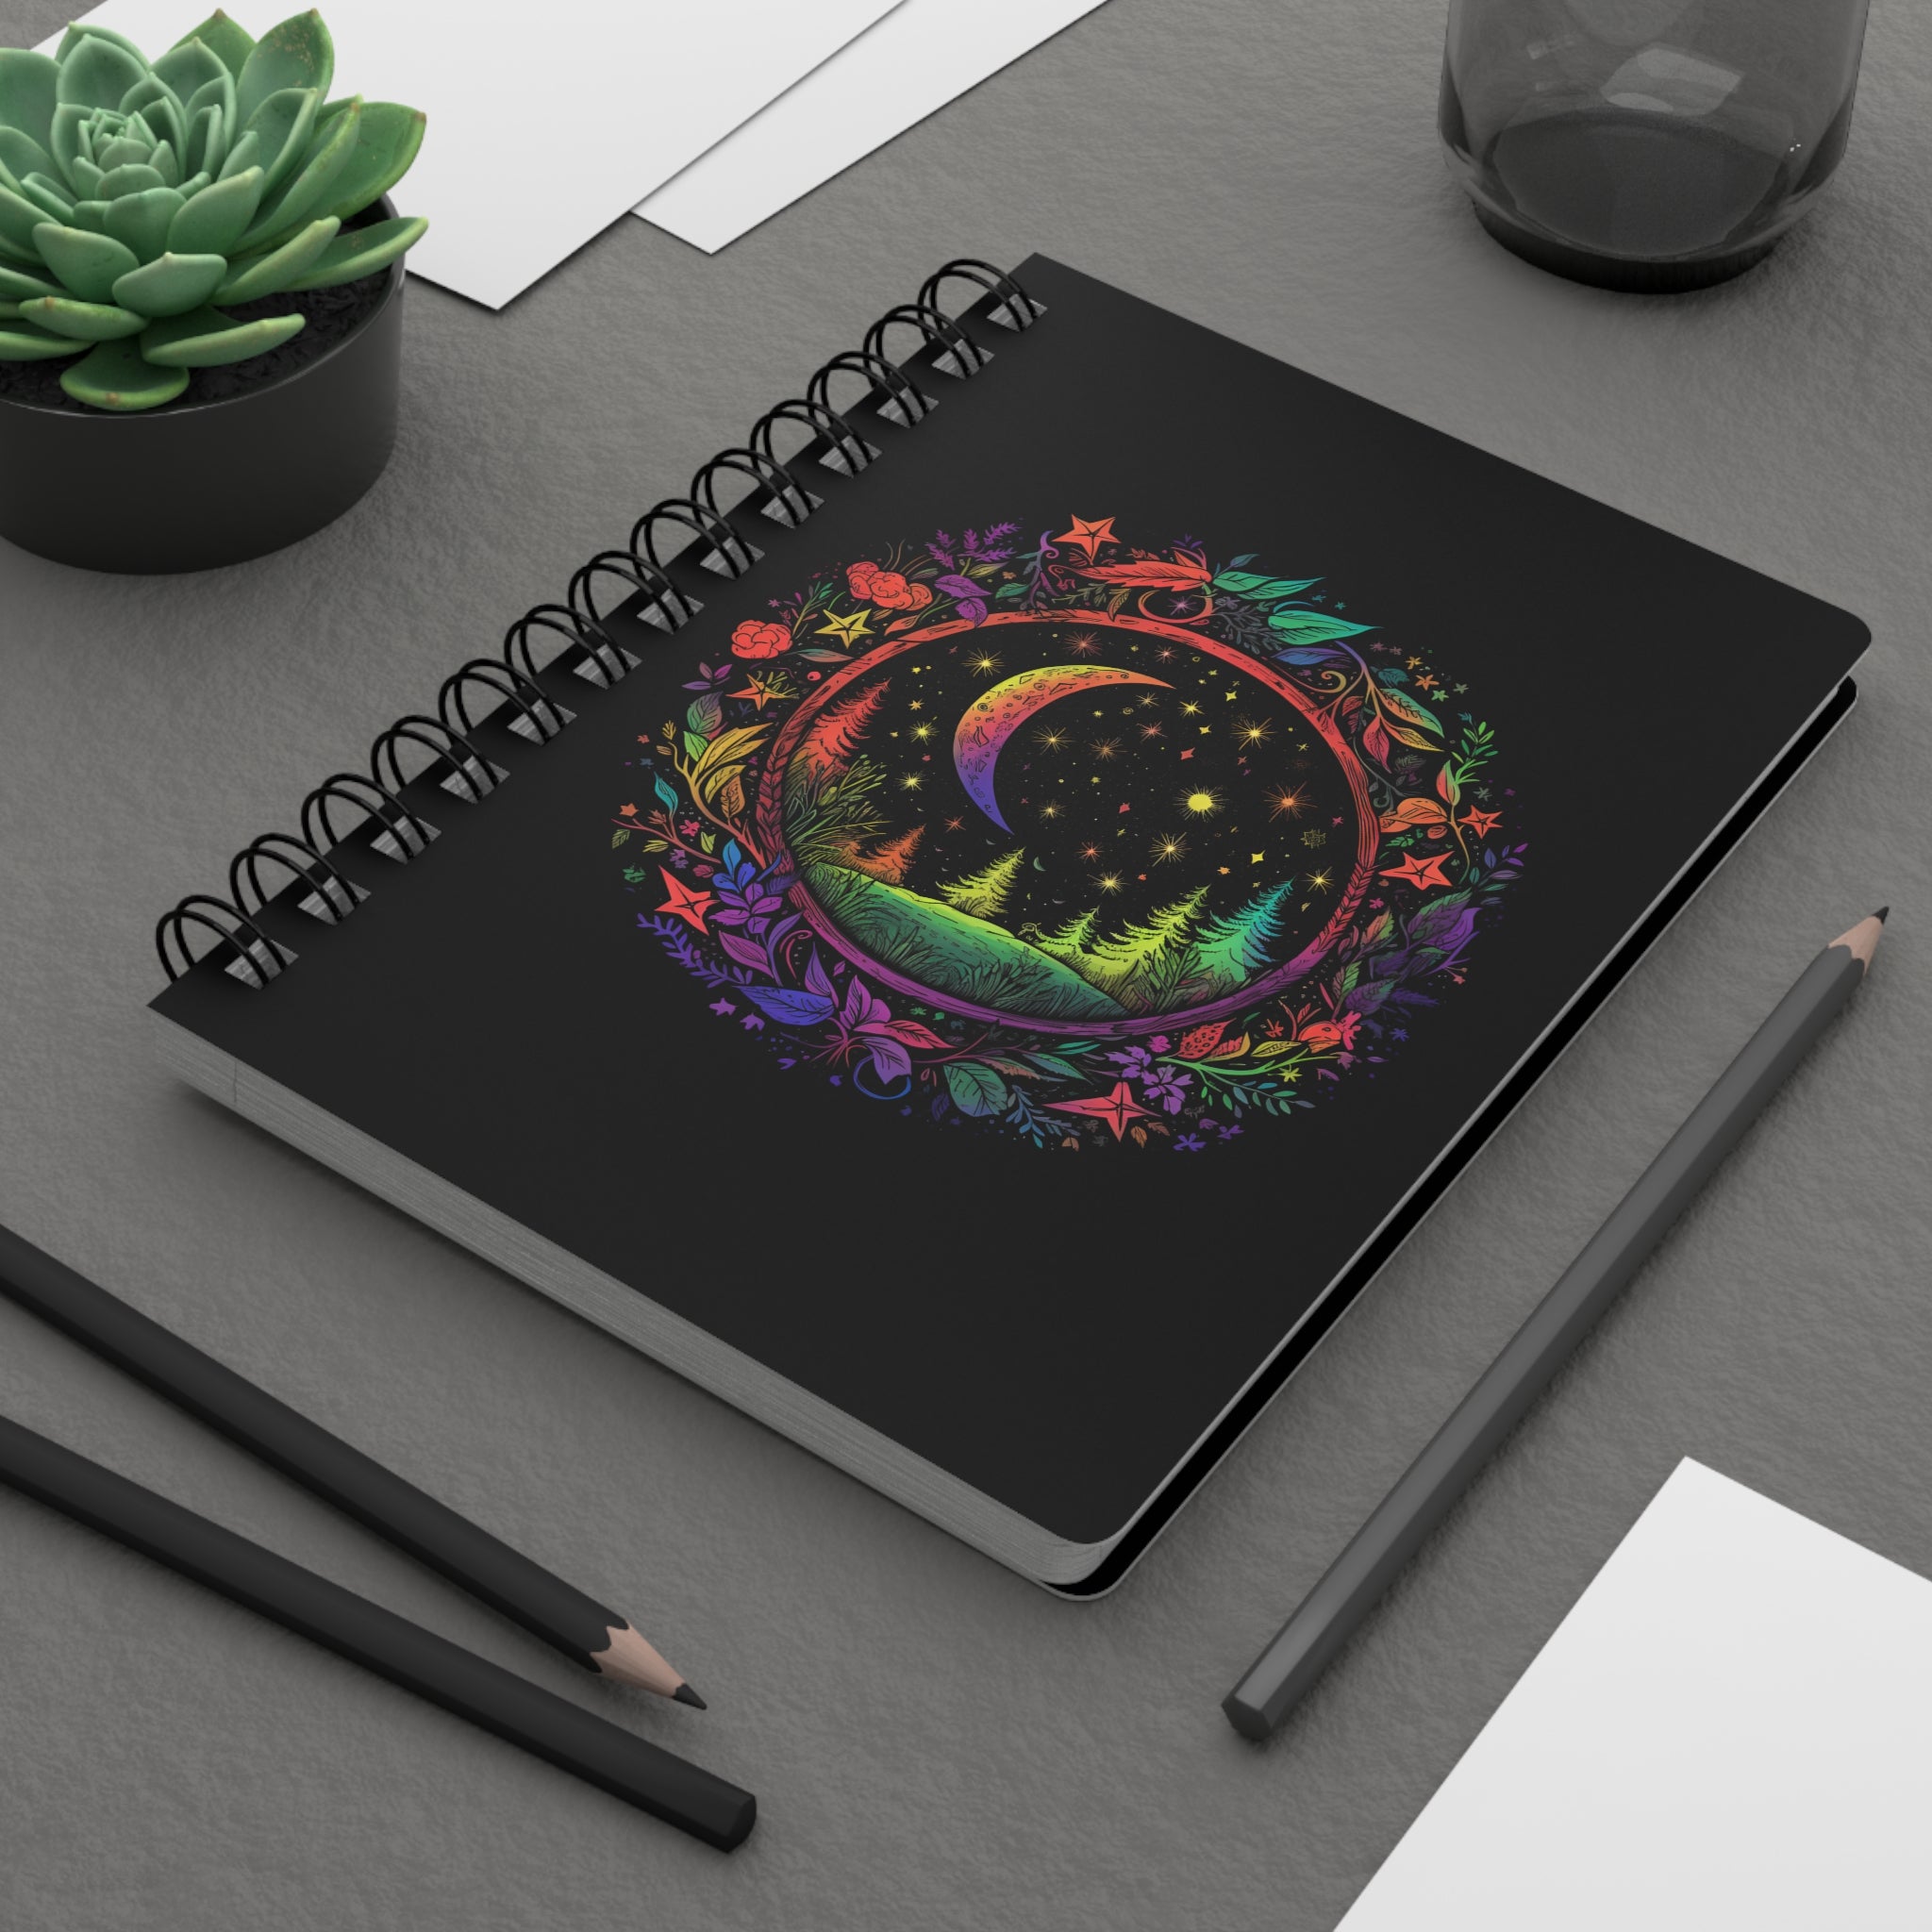 Celestial Neon Forest Spiral Notebook - Spiral Lined, 5 x 7 Inch